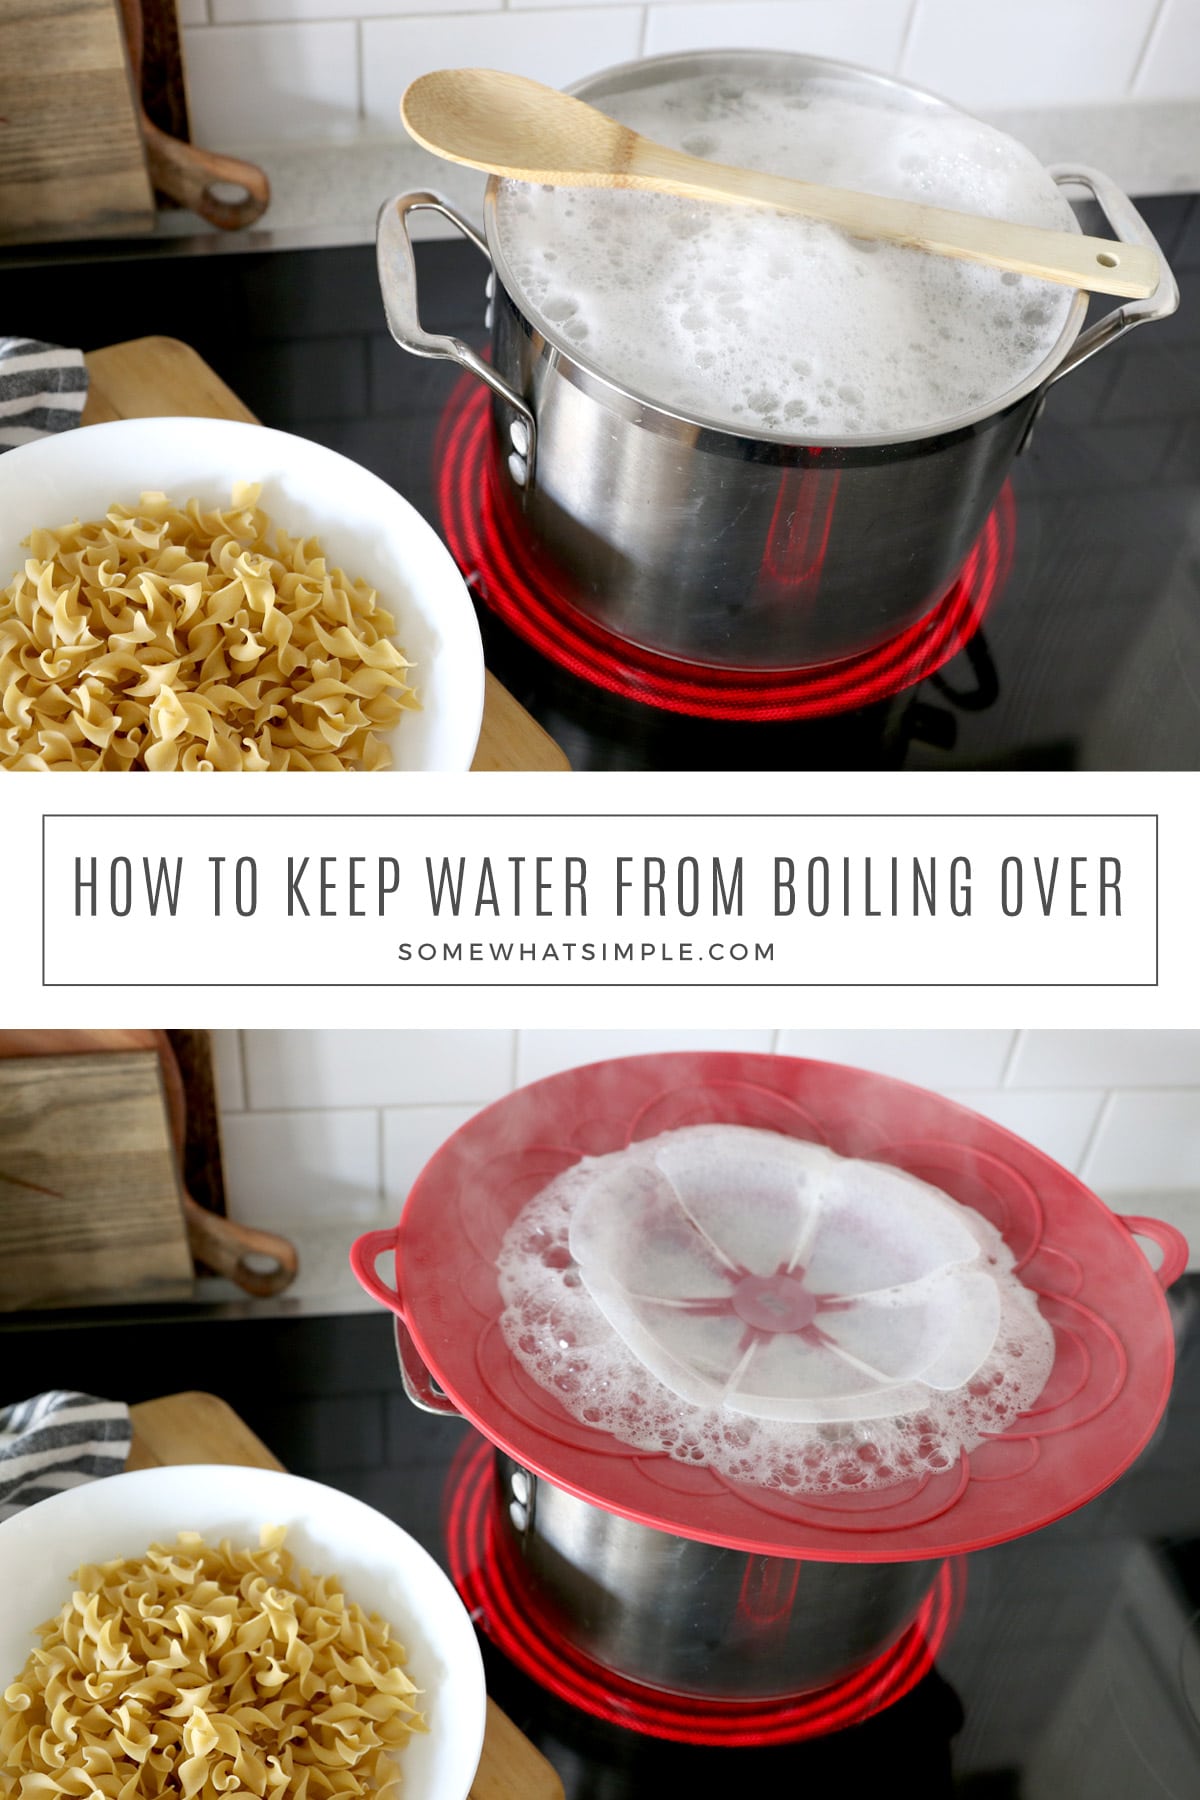 boiling - What's the best way to keep cover of a pan slightly